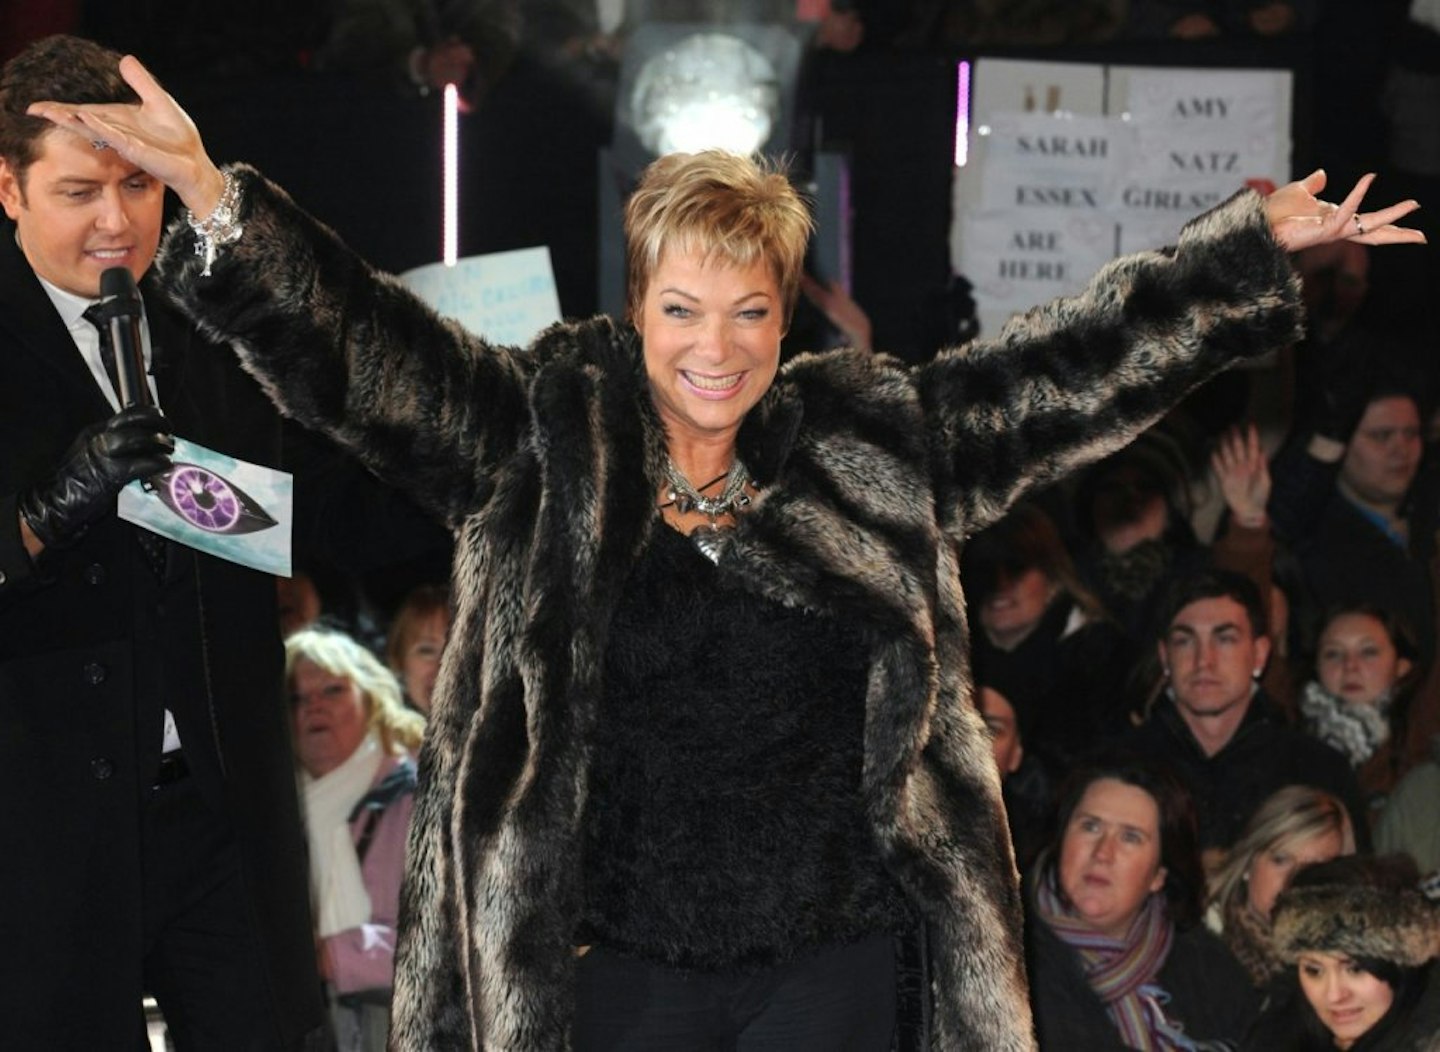 Denise Welch standing with her arms in the air